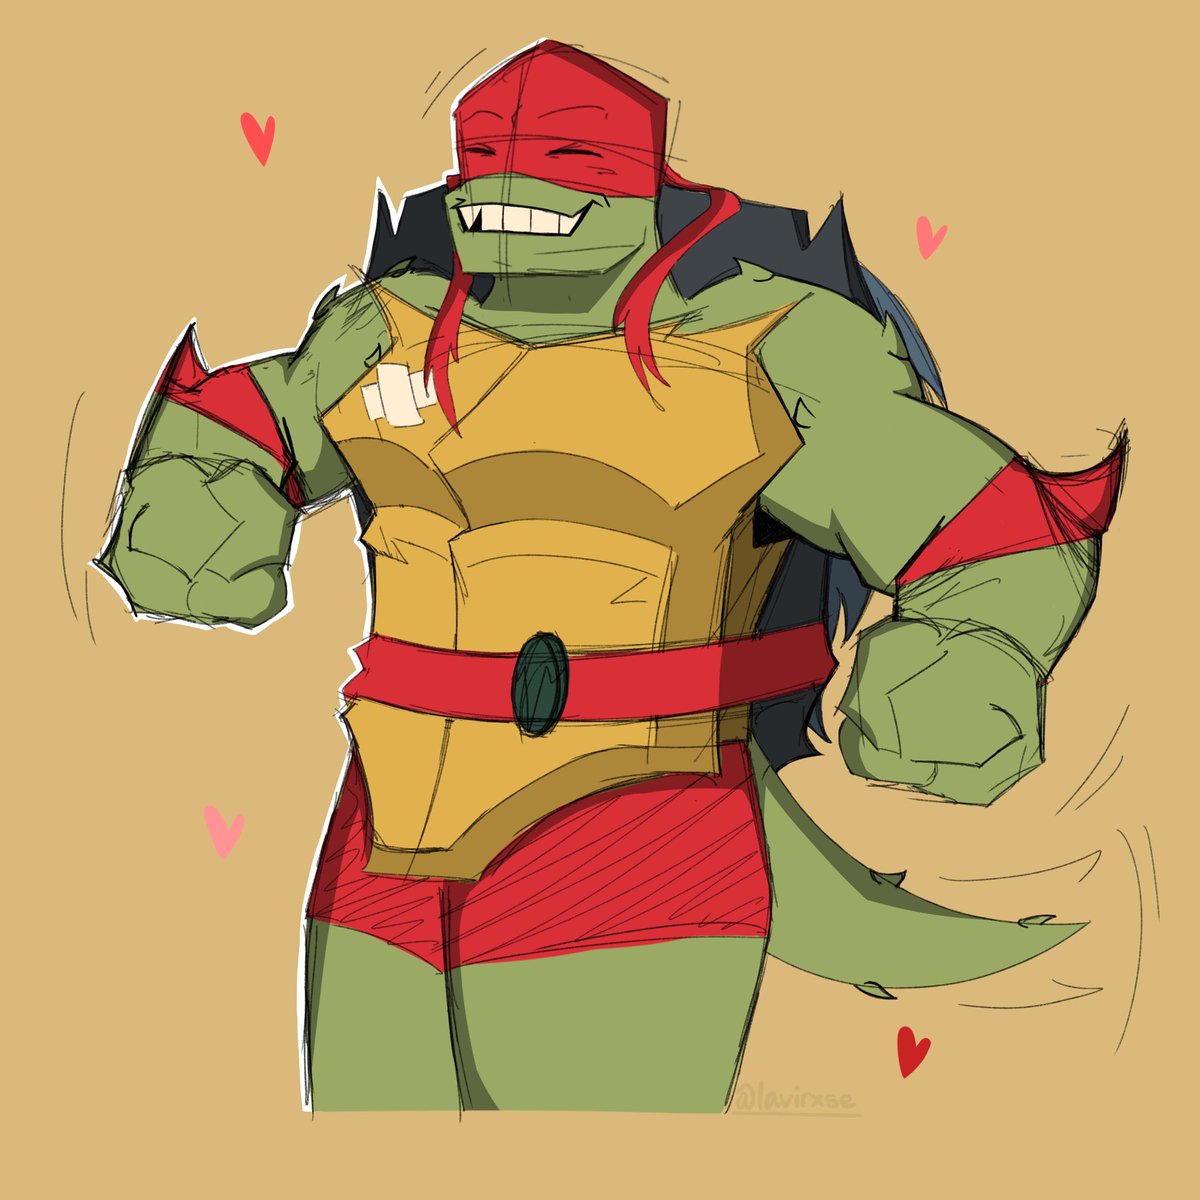 Raph sketch for your troubles ❤️
he means so much to me 

#rottmnt #rottmntraph #rottmntfanart